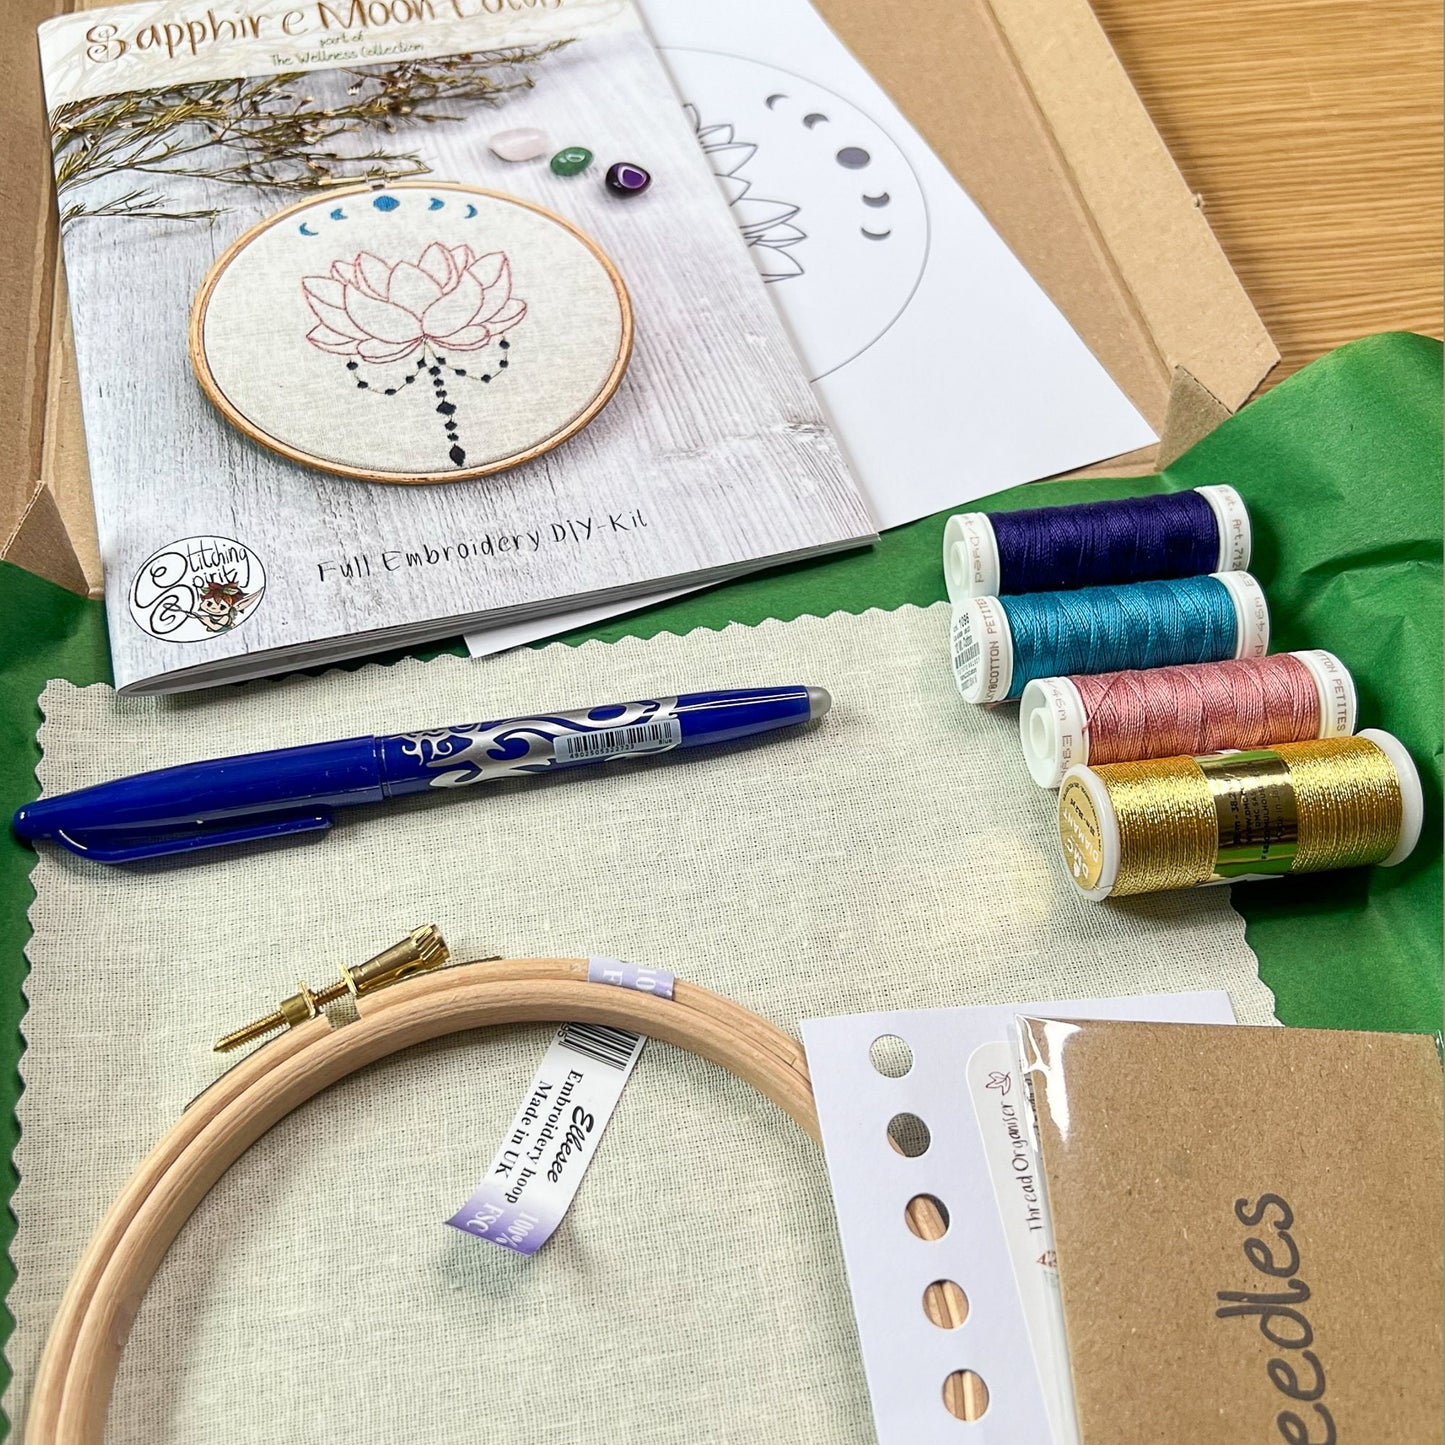 Sapphire Moon embroidery kit